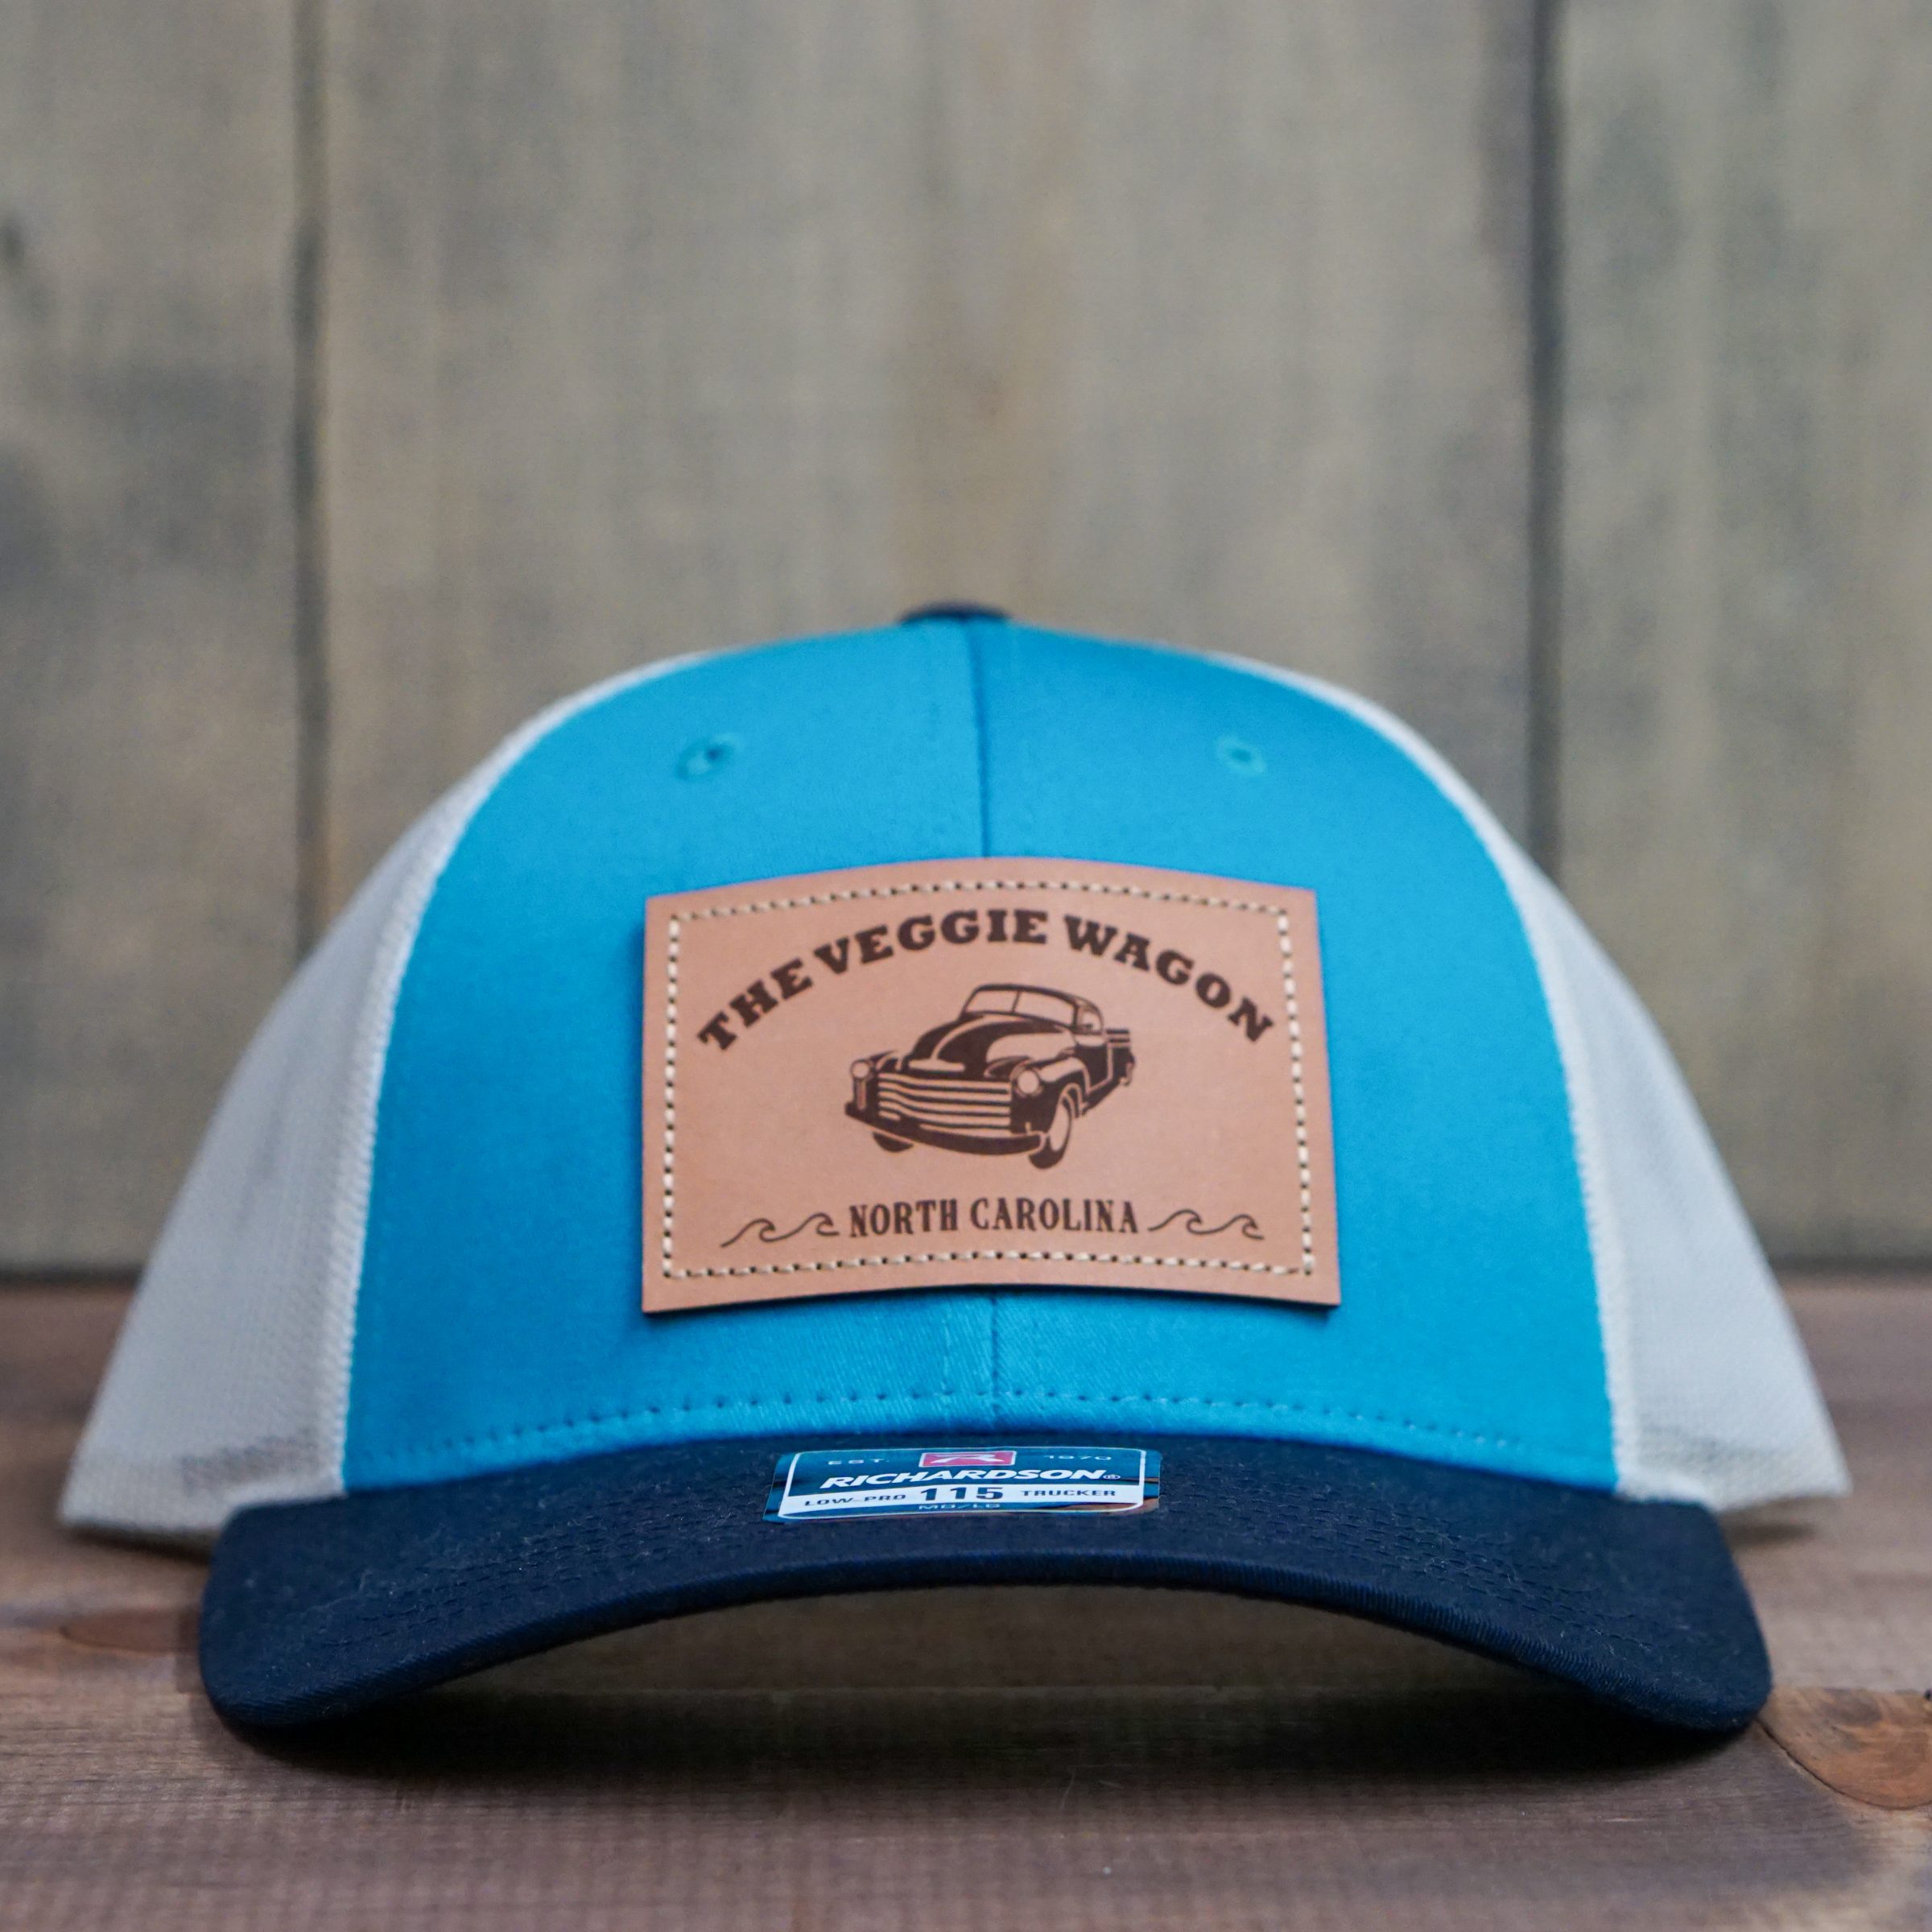 Navy/Teal/White Leather Patch Hat – The Veggie Wagon